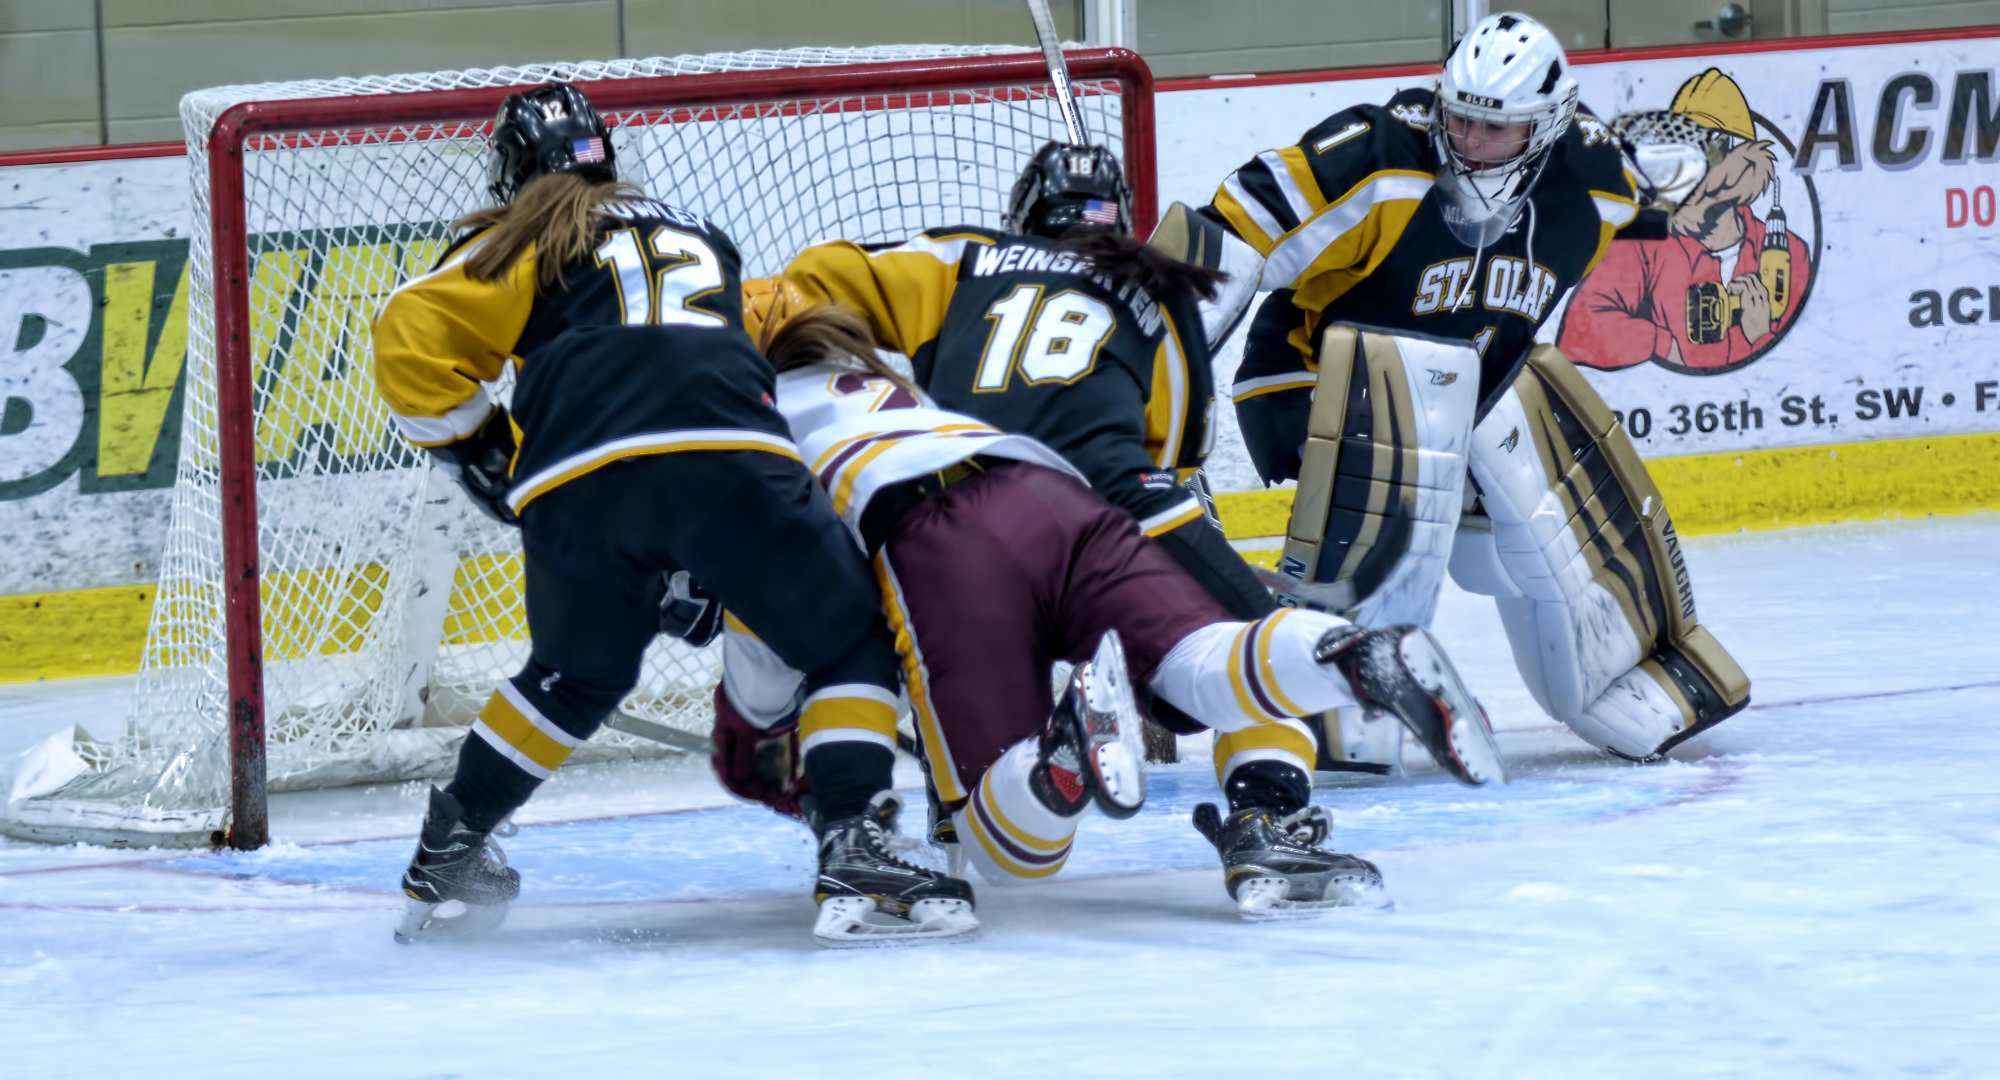 Amanda Flemming dives between two St. Olaf players to tap in a goal during the second period of the Cobbers' 5-3 win over the Oles.